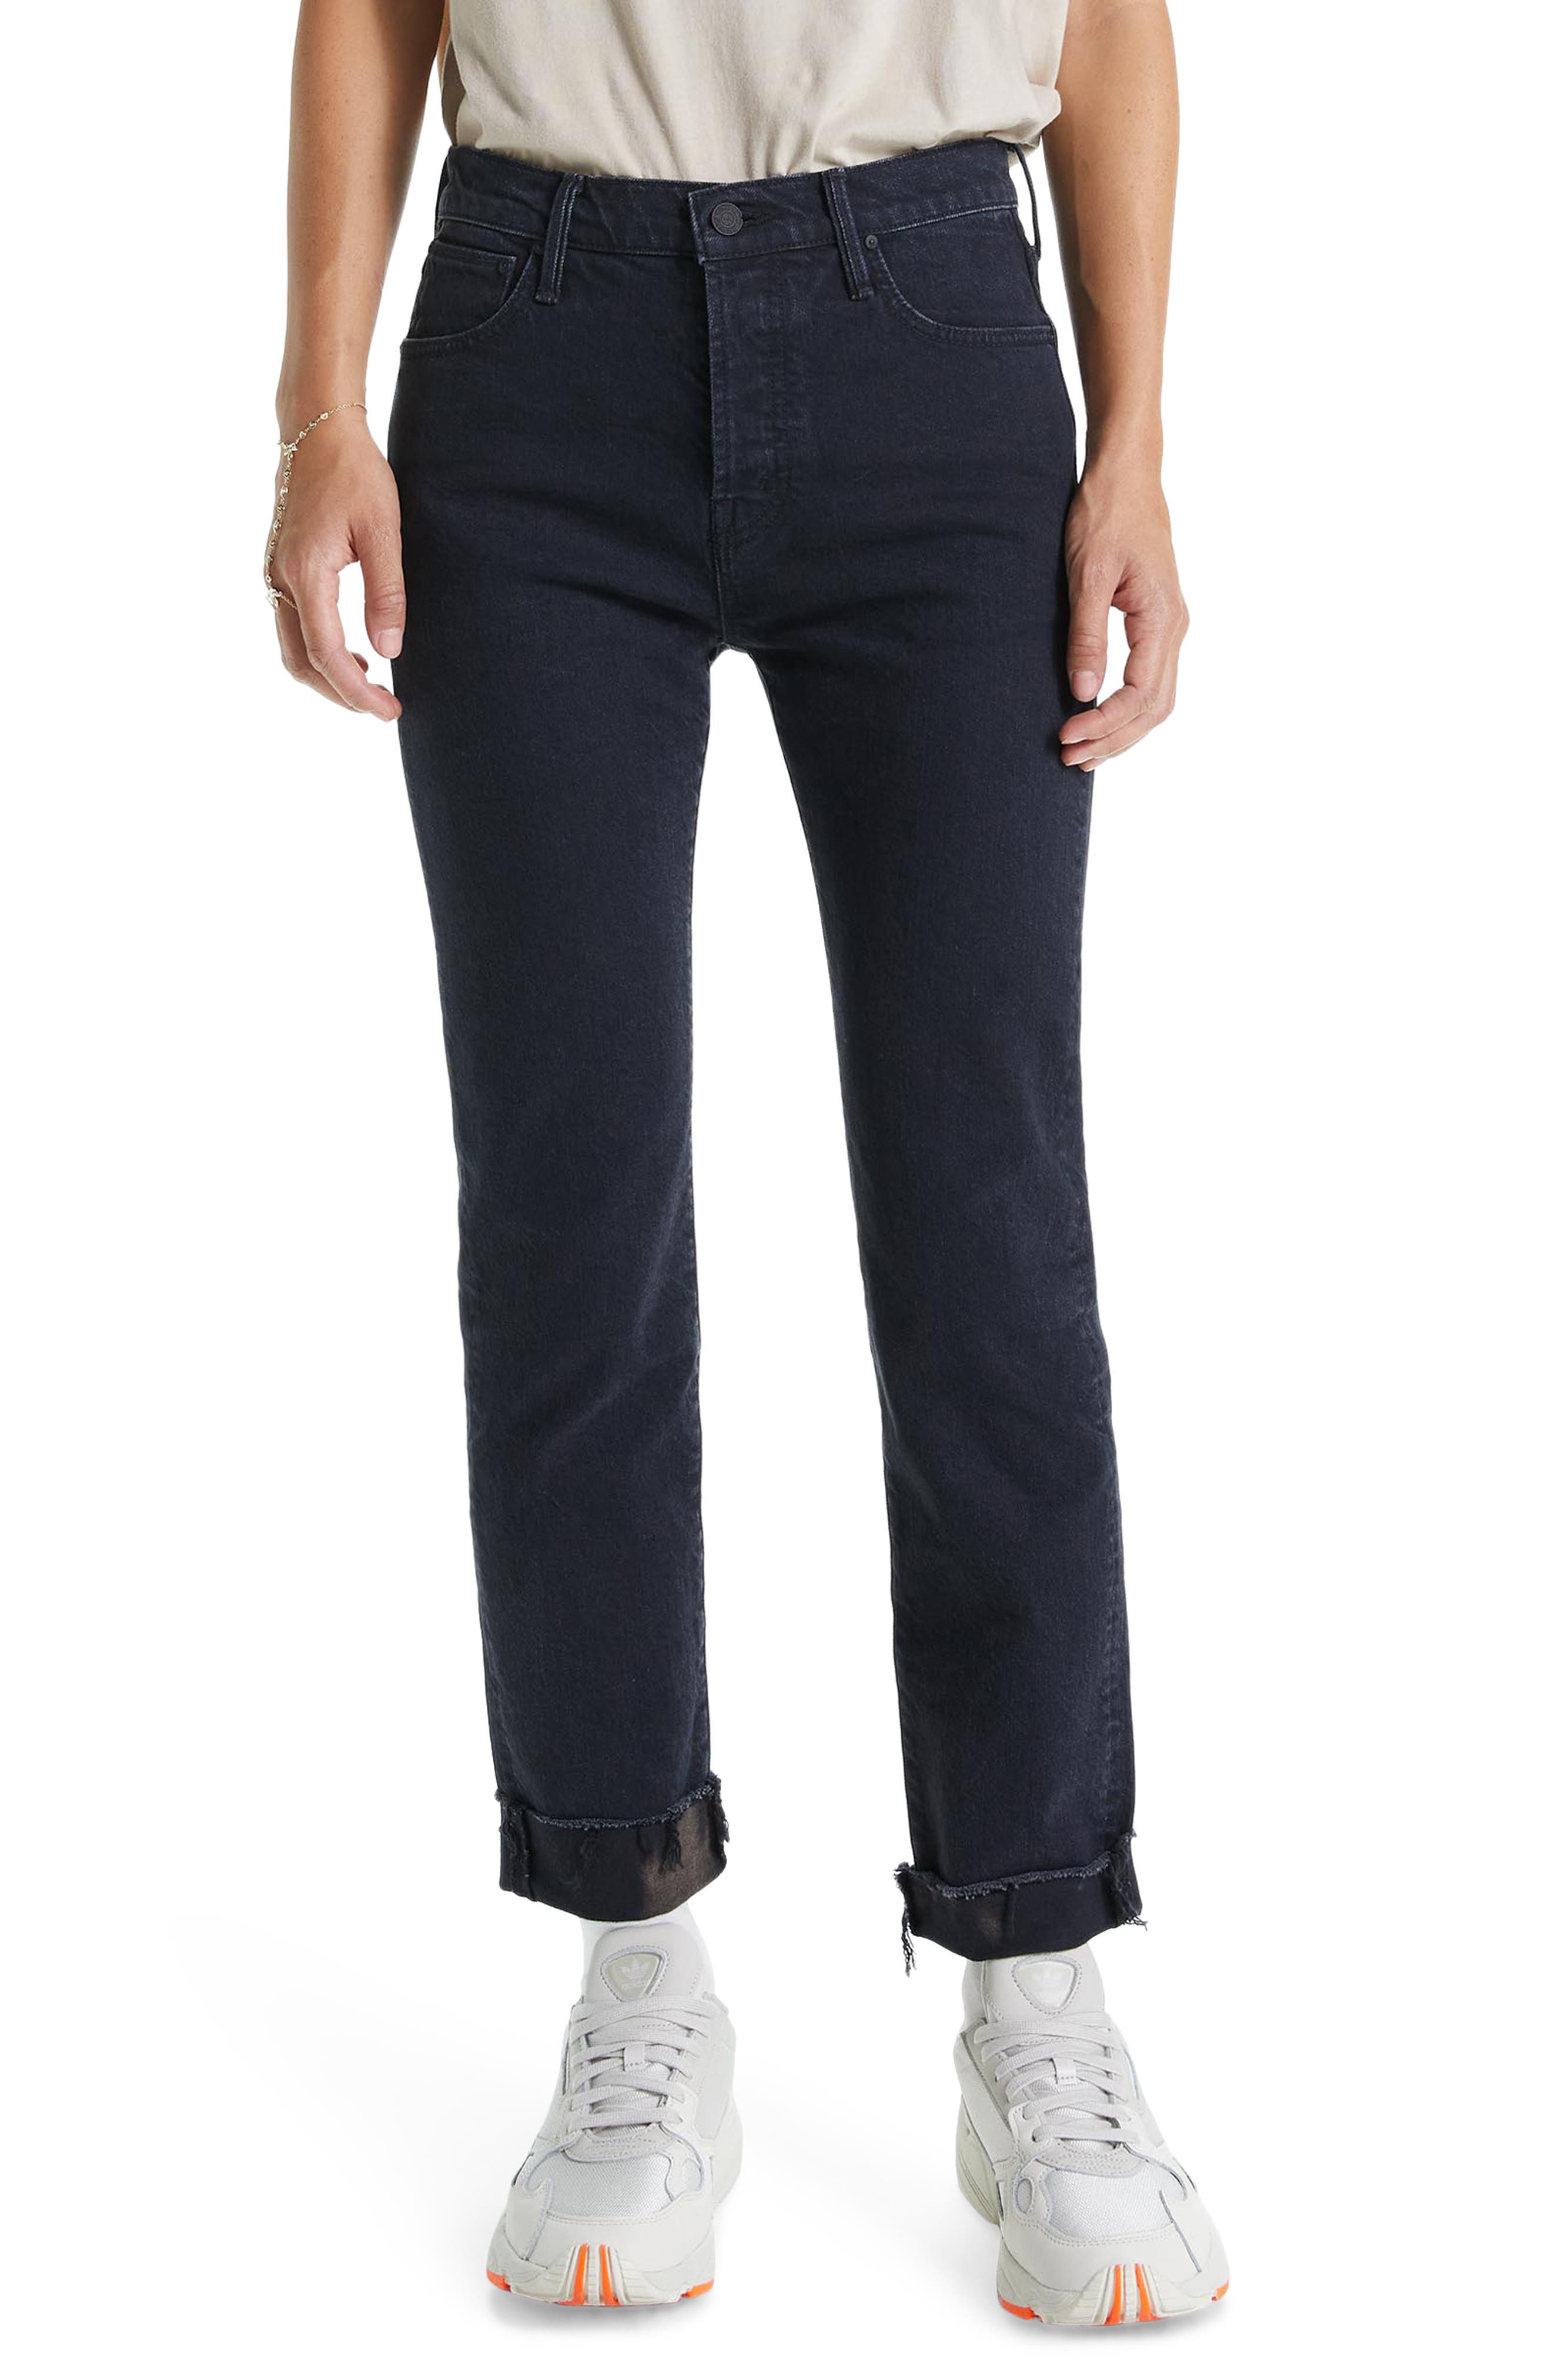 mother black jeans with white stripe